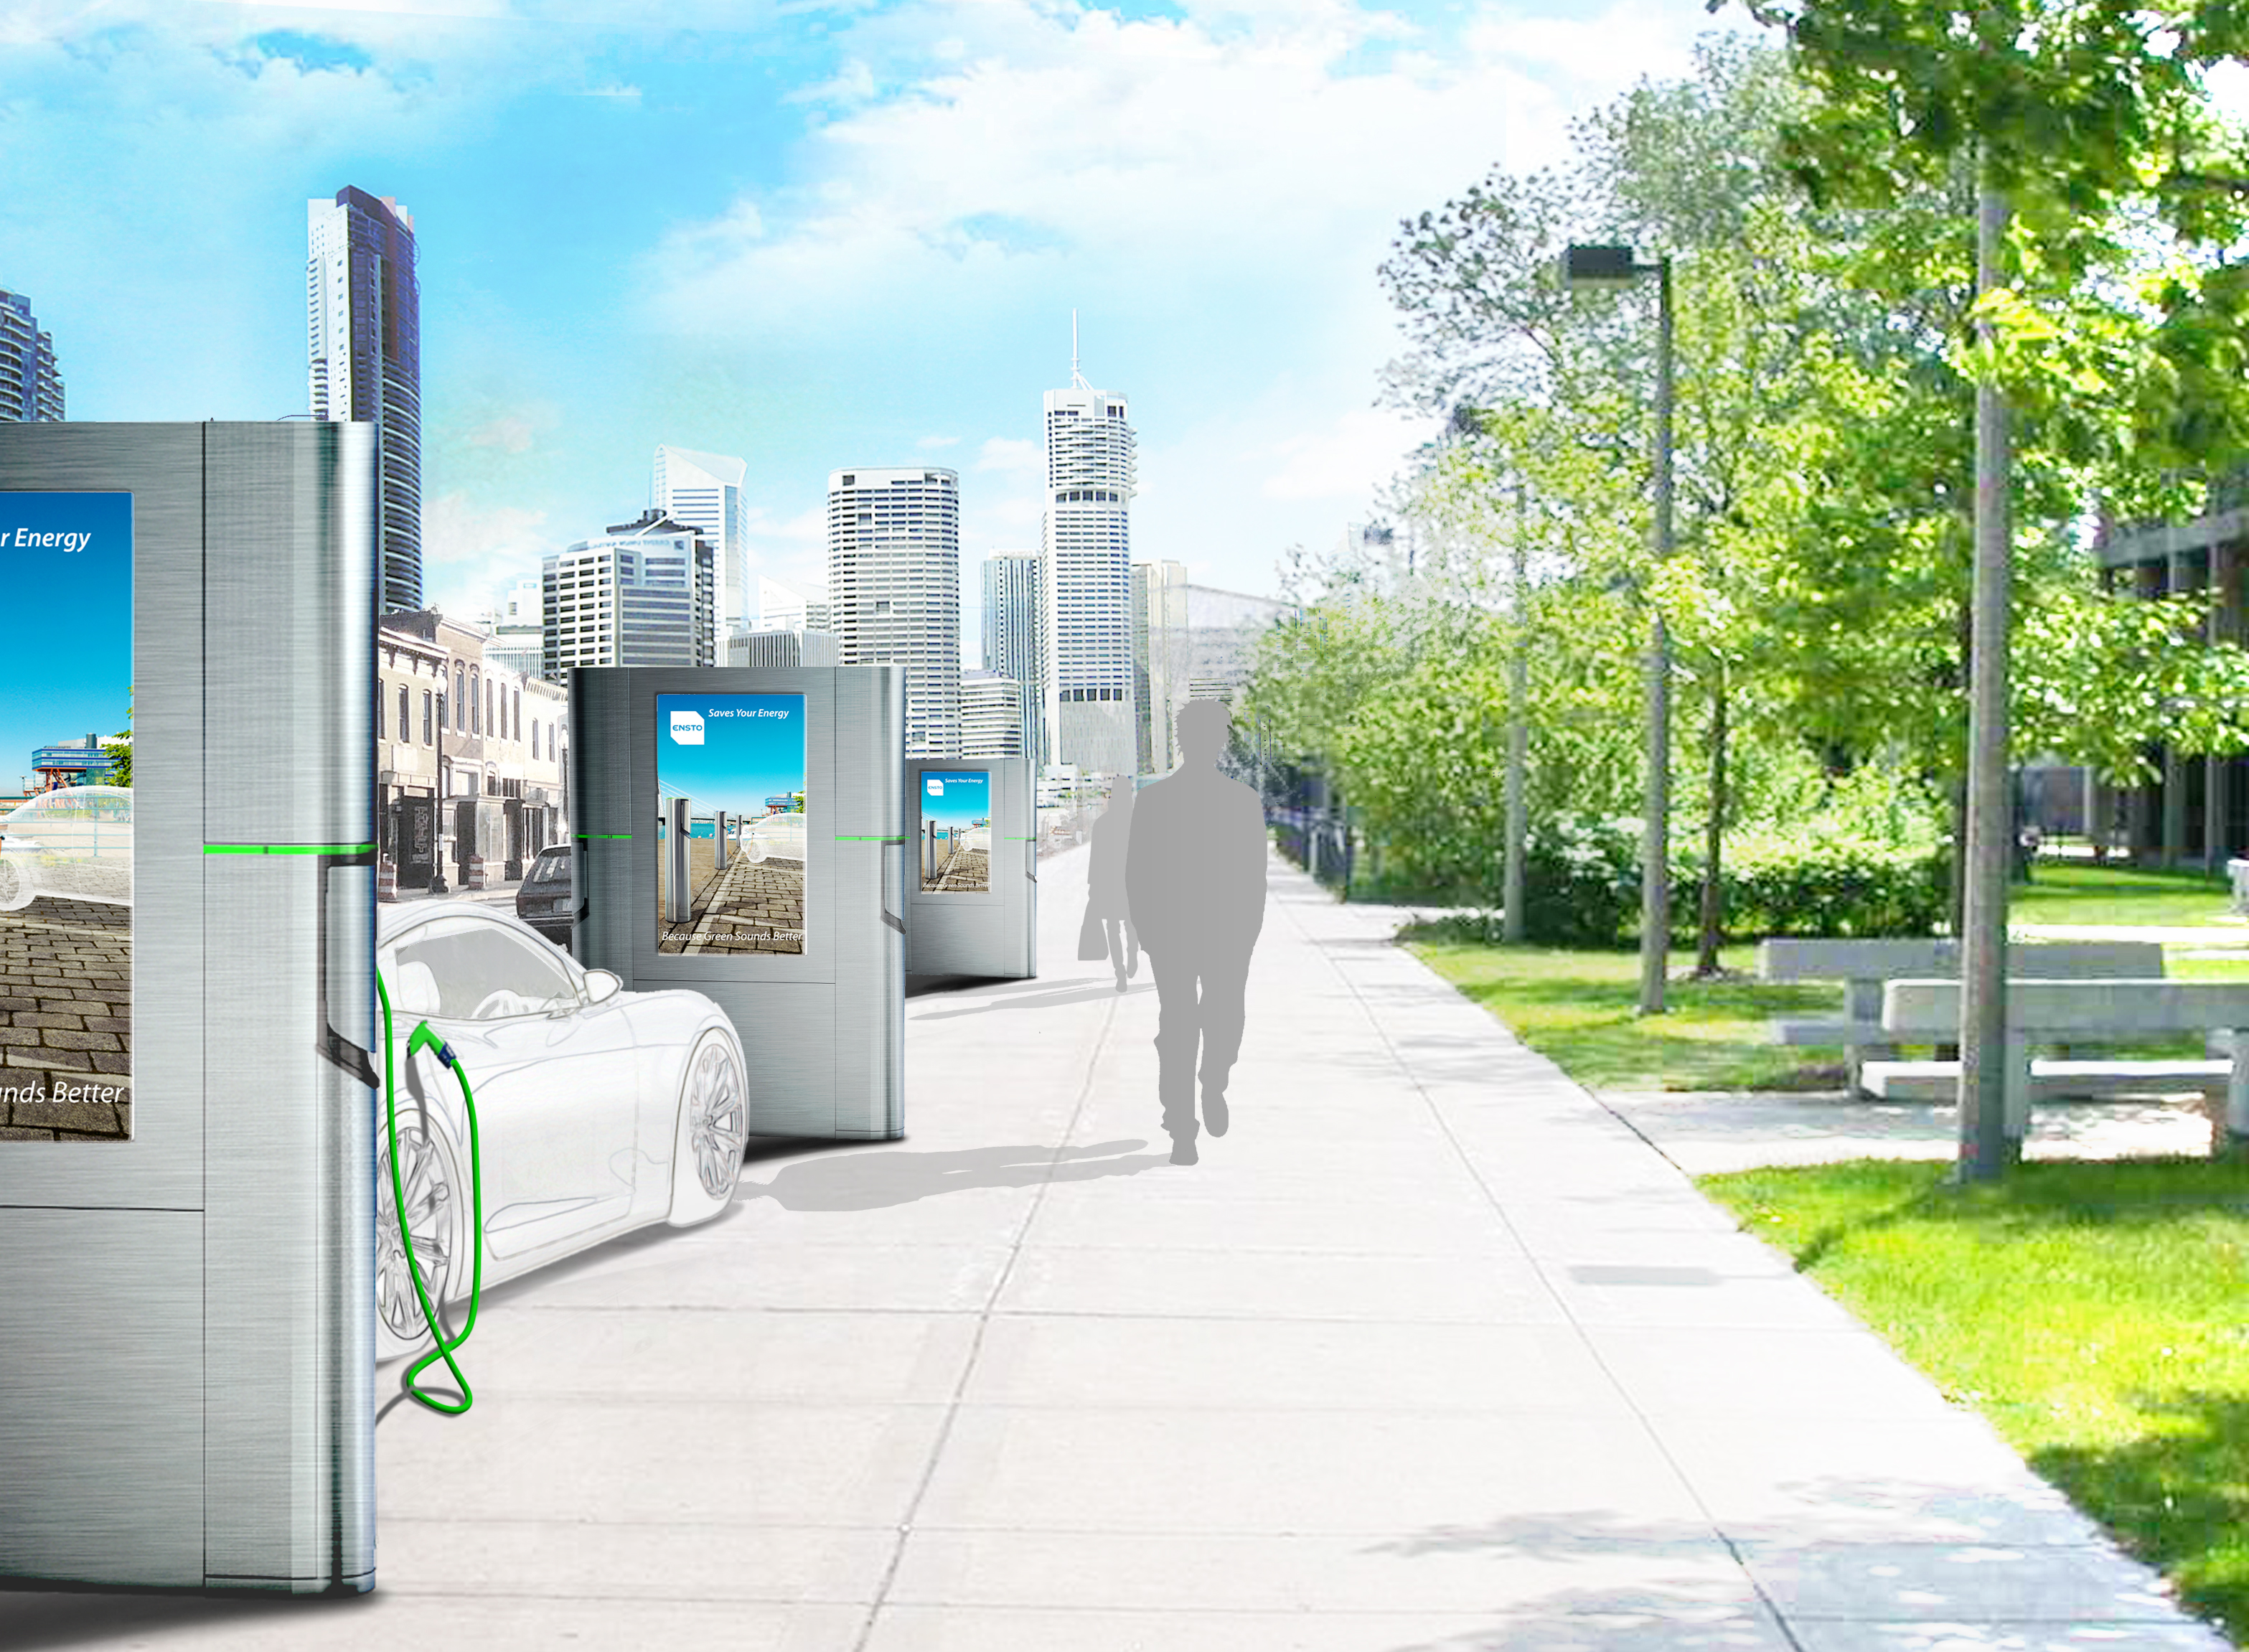  Digital outdoor advertising enables charging infrastructure for electric vehicles